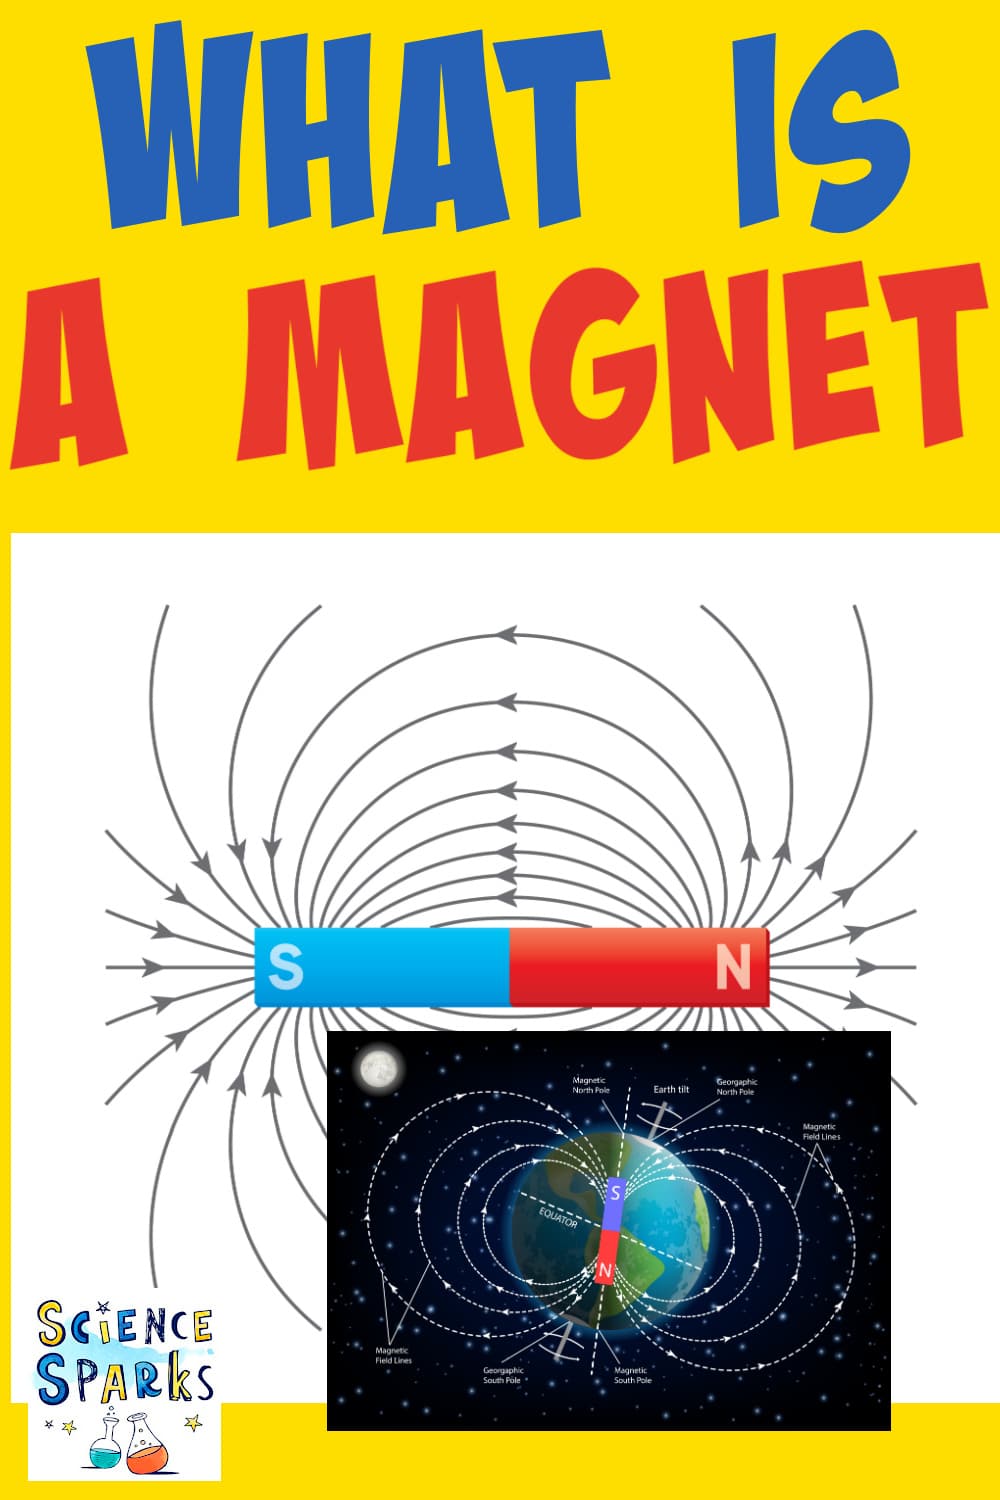 What Causes Different Strengths in Magnets?